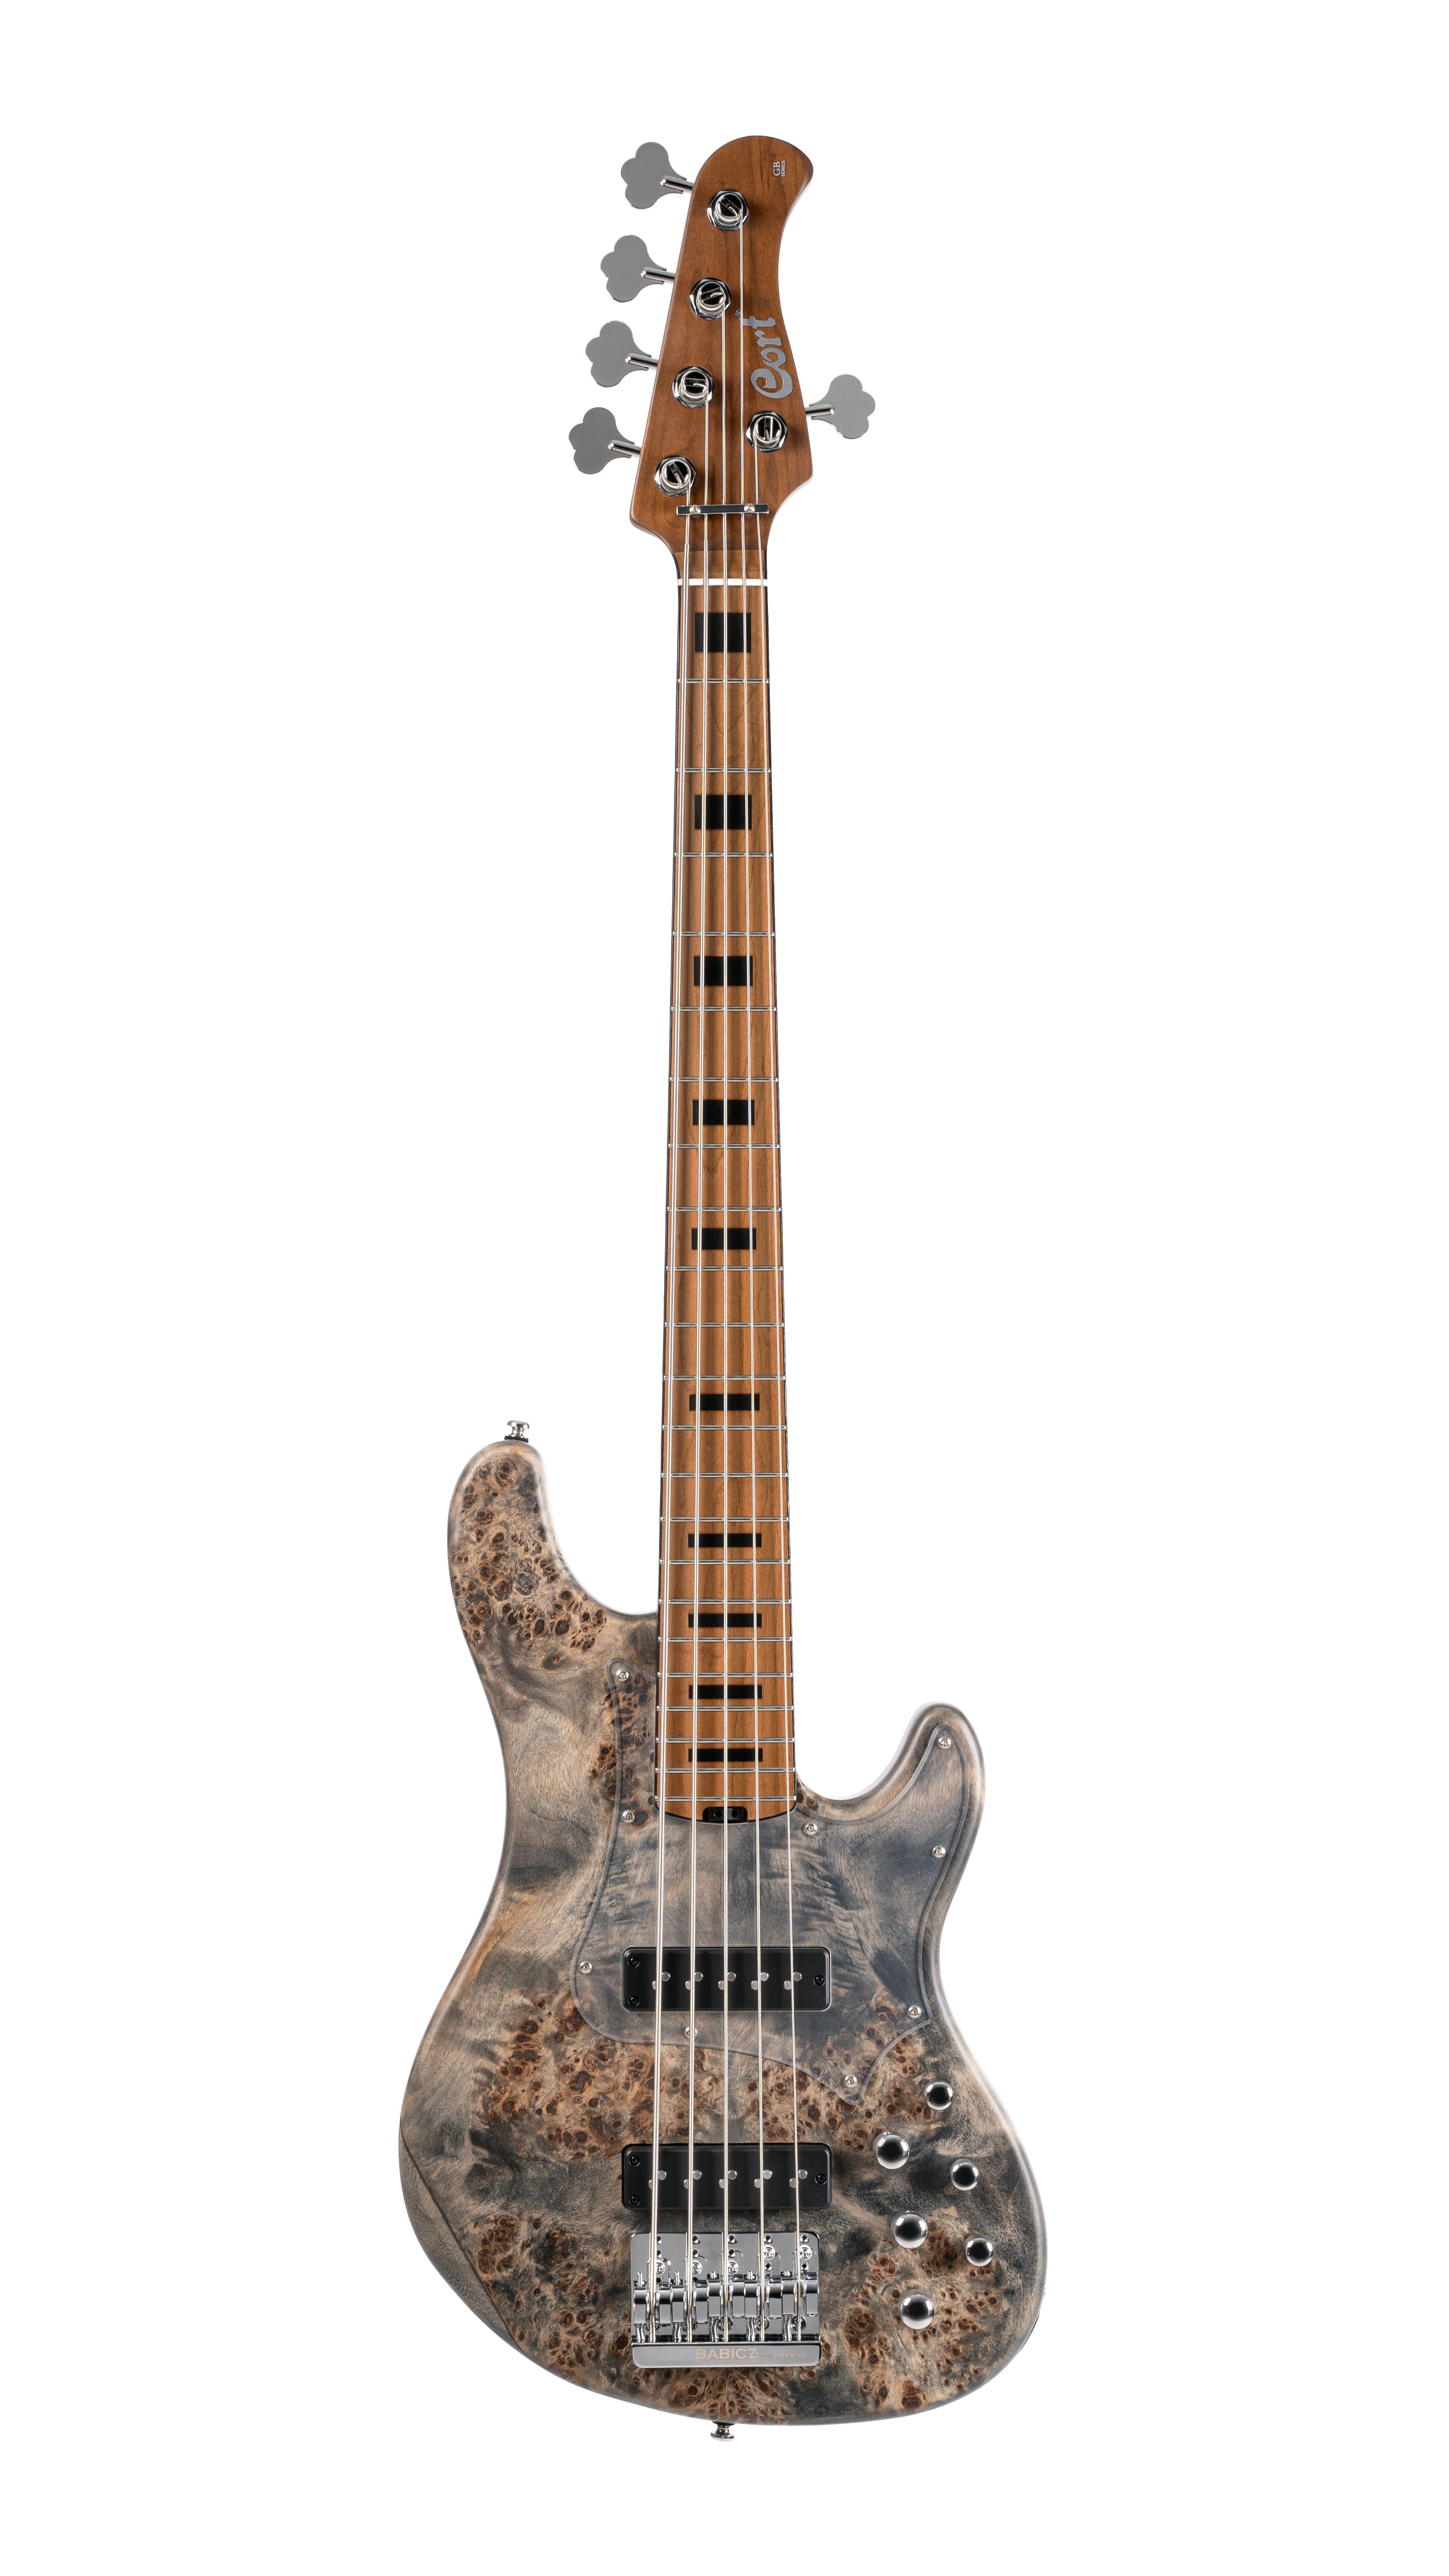 Cort GB Modern 5 String Open Pore Charcoal Grey, Bass Guitar for sale at Richards Guitars.